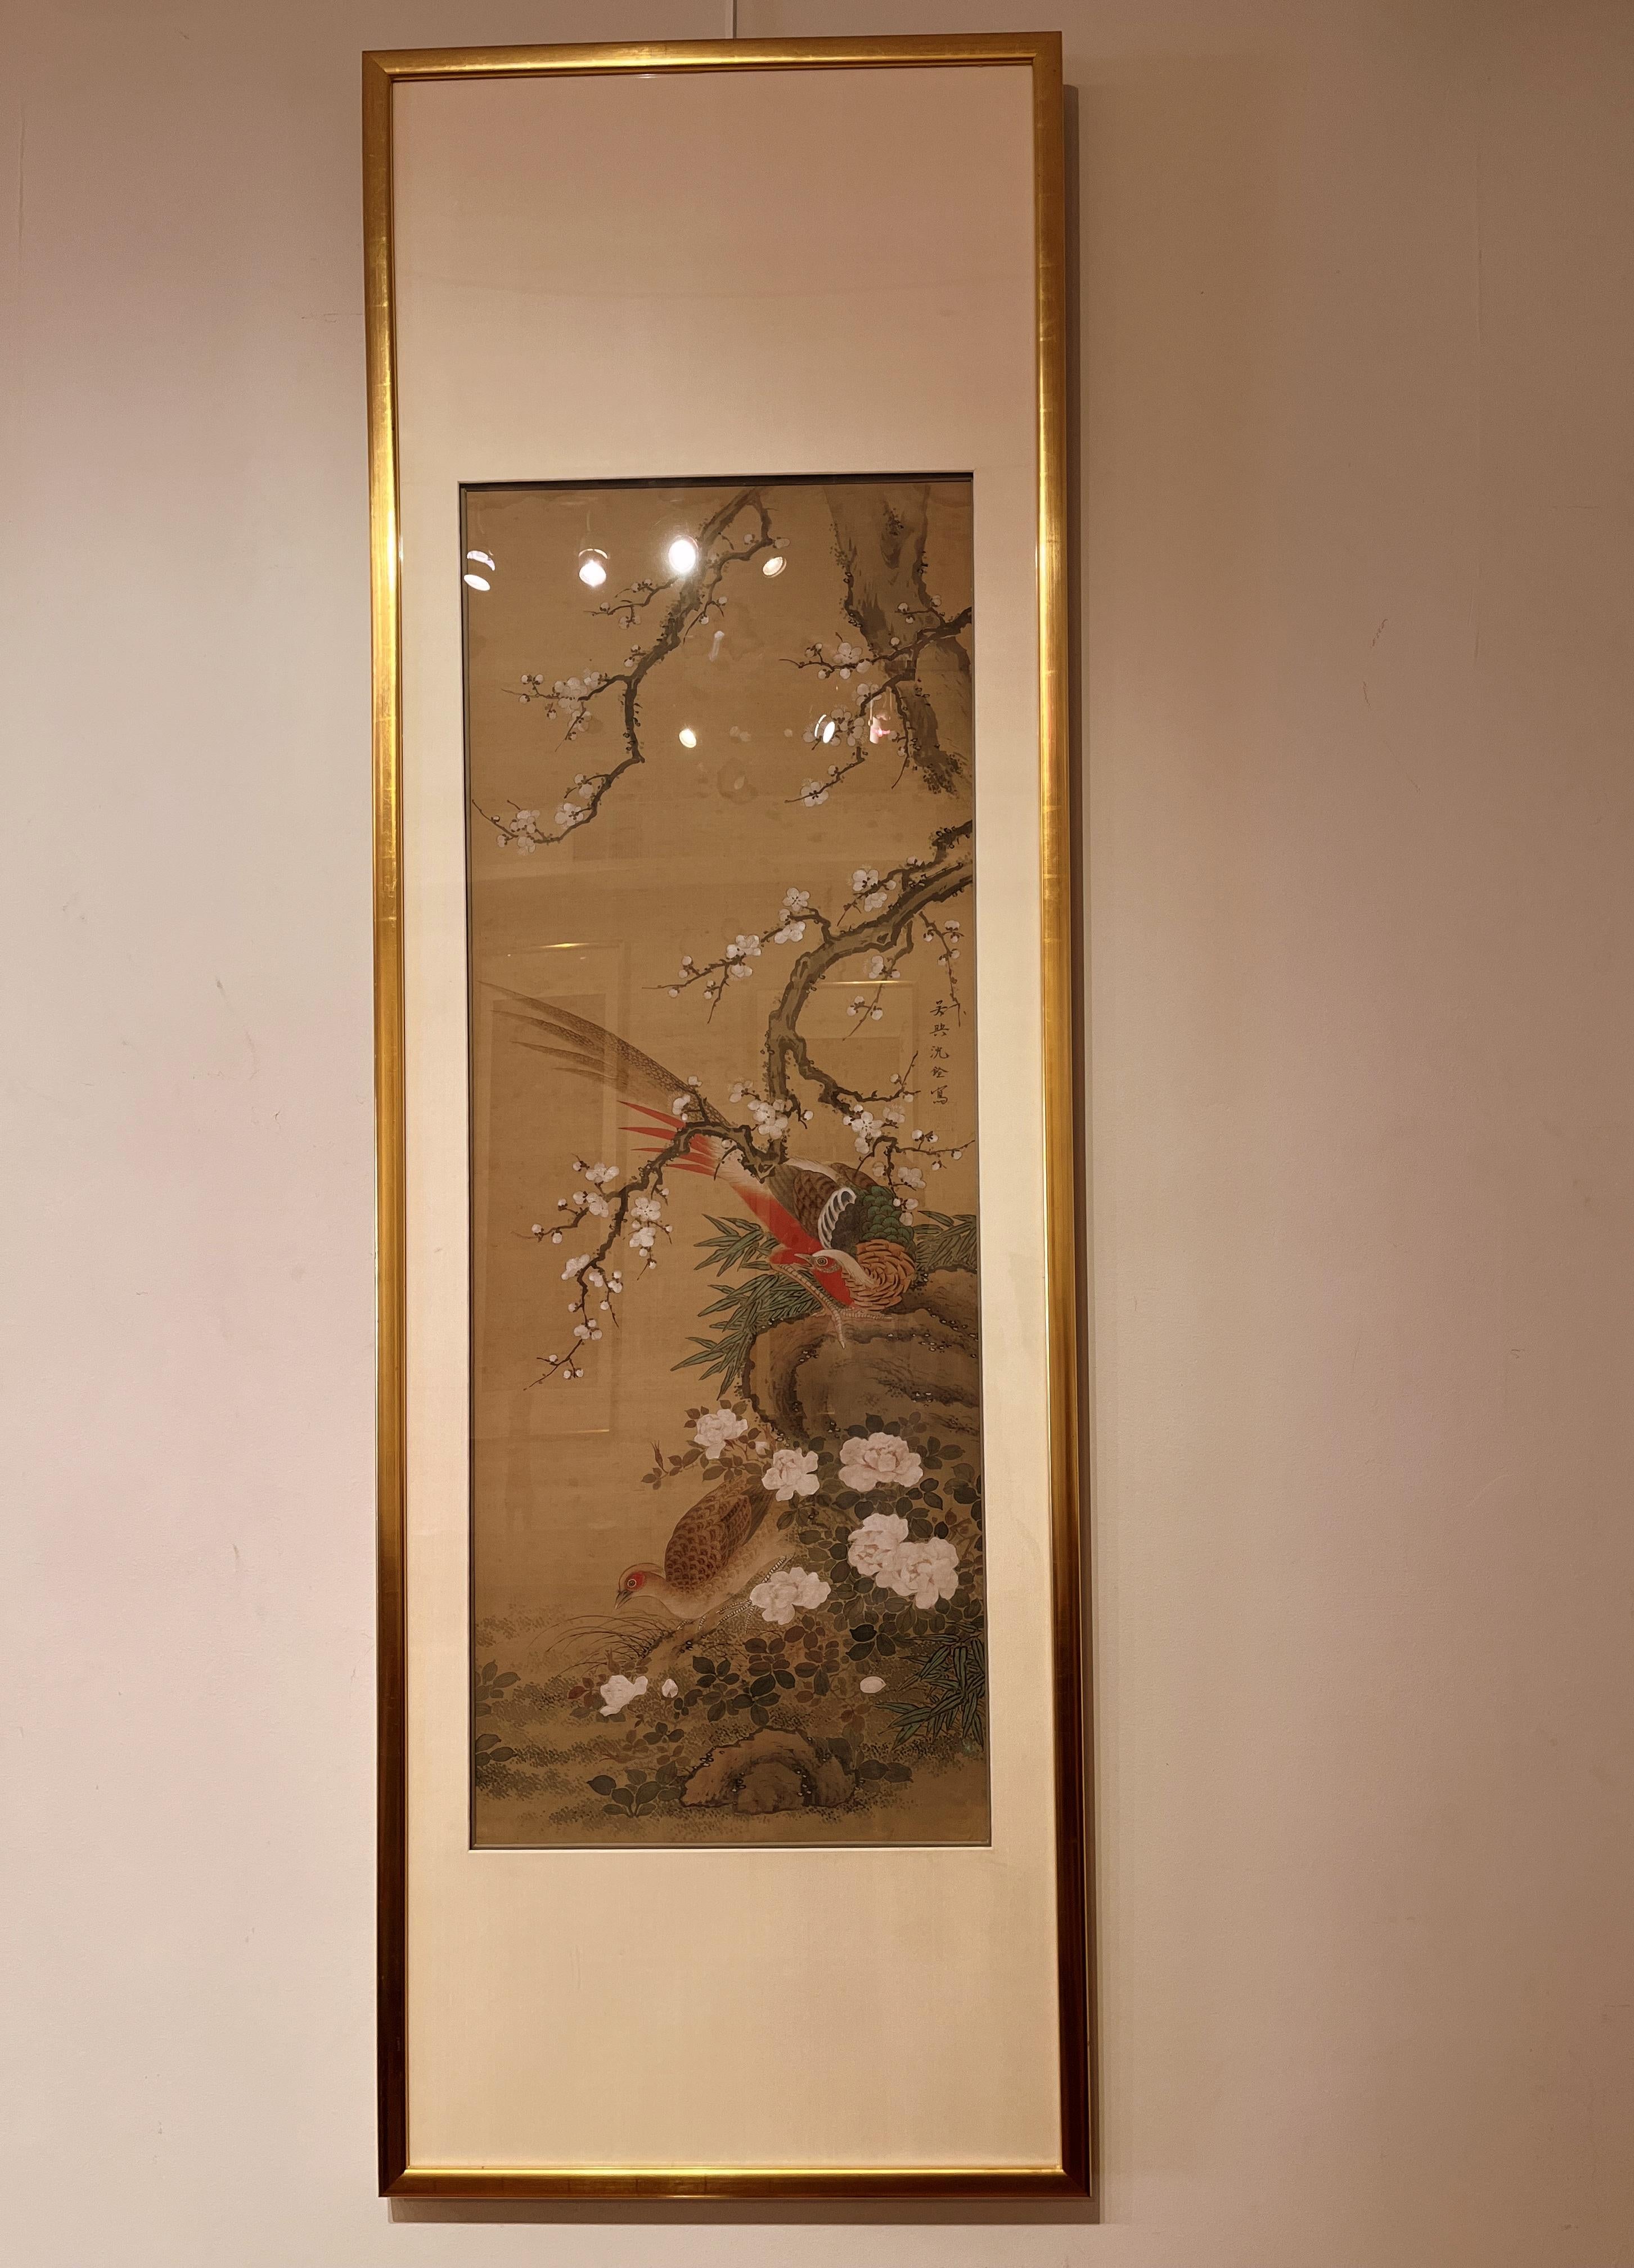 Fined Chinese brush painting of a pheasant and a quail under a plum tree, ink and color on silk, 19th century, Conservation framed
Painting was a scroll  acquired from Sotheby's website in late 1990s
Then framed in Conservation Framed.
Overall size